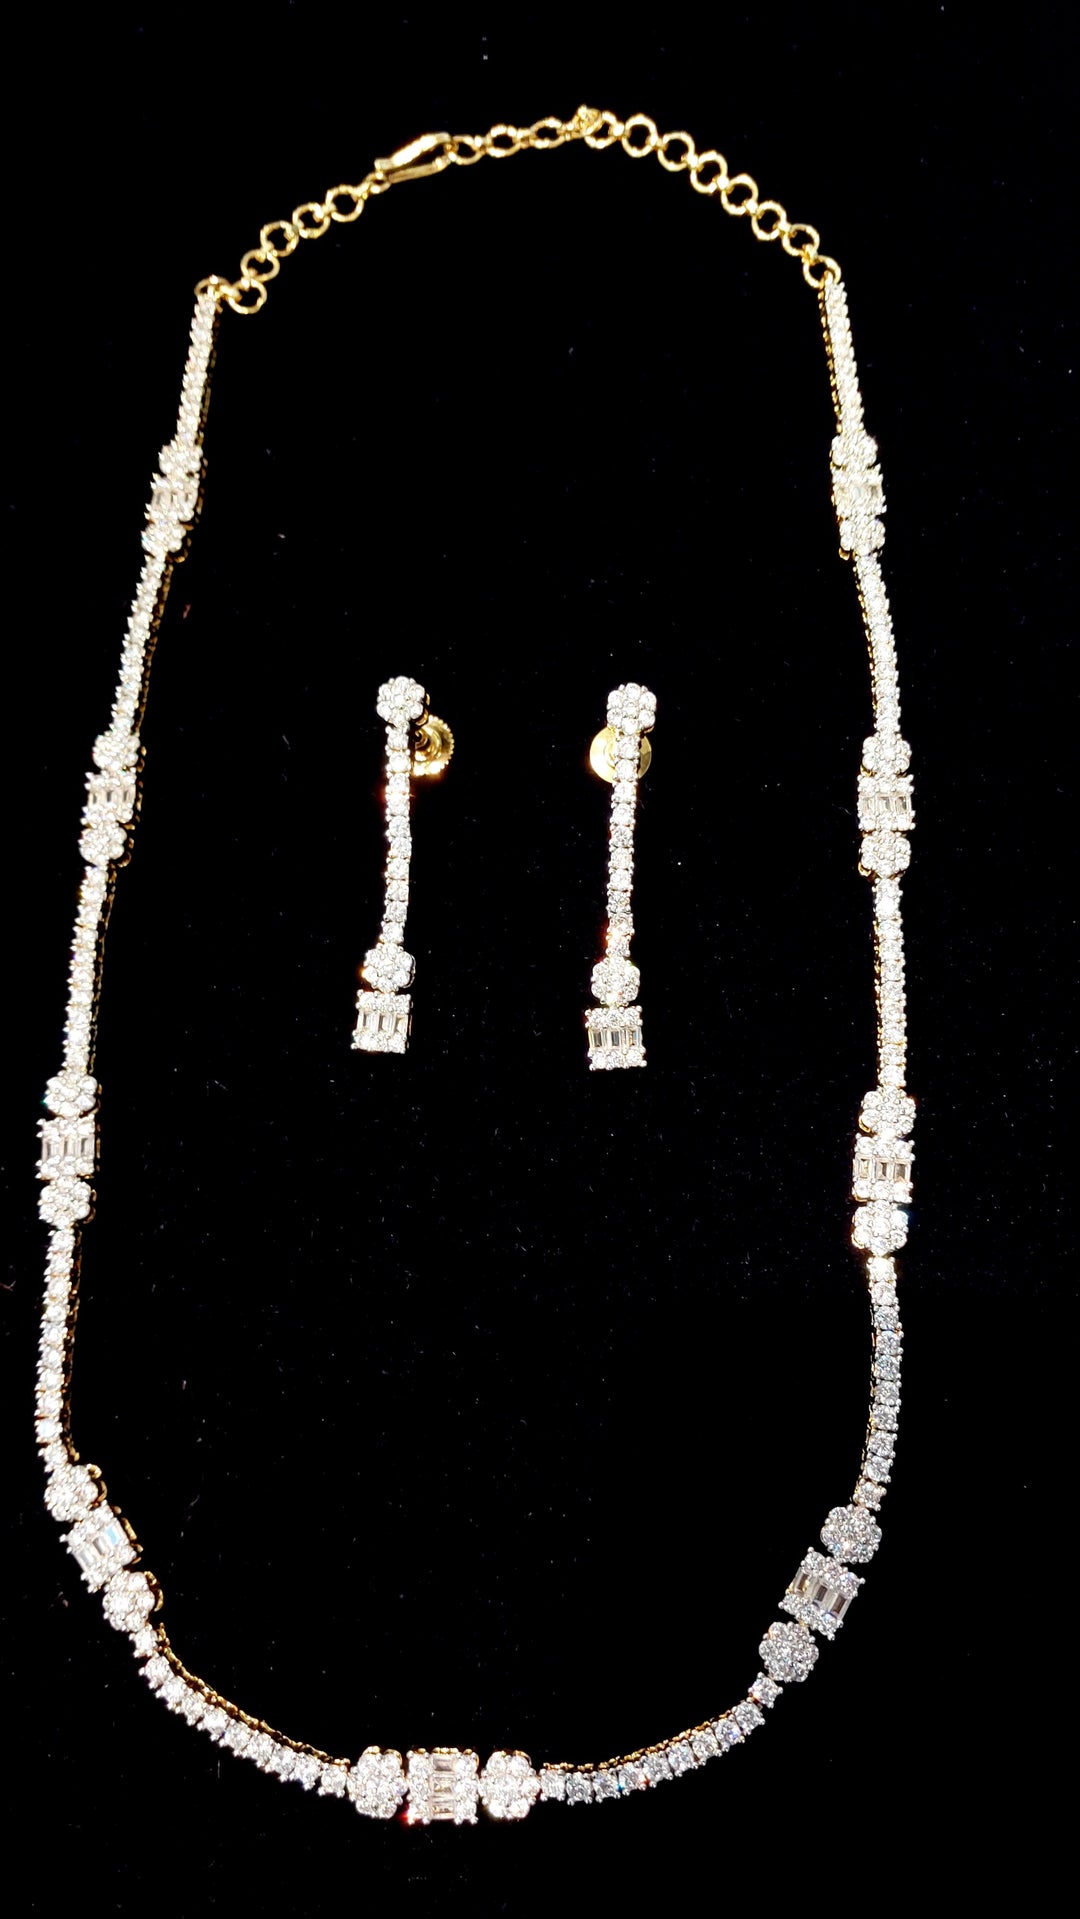 Blythe Silver Zircon Diamond Delicate Necklace and Earrings Set